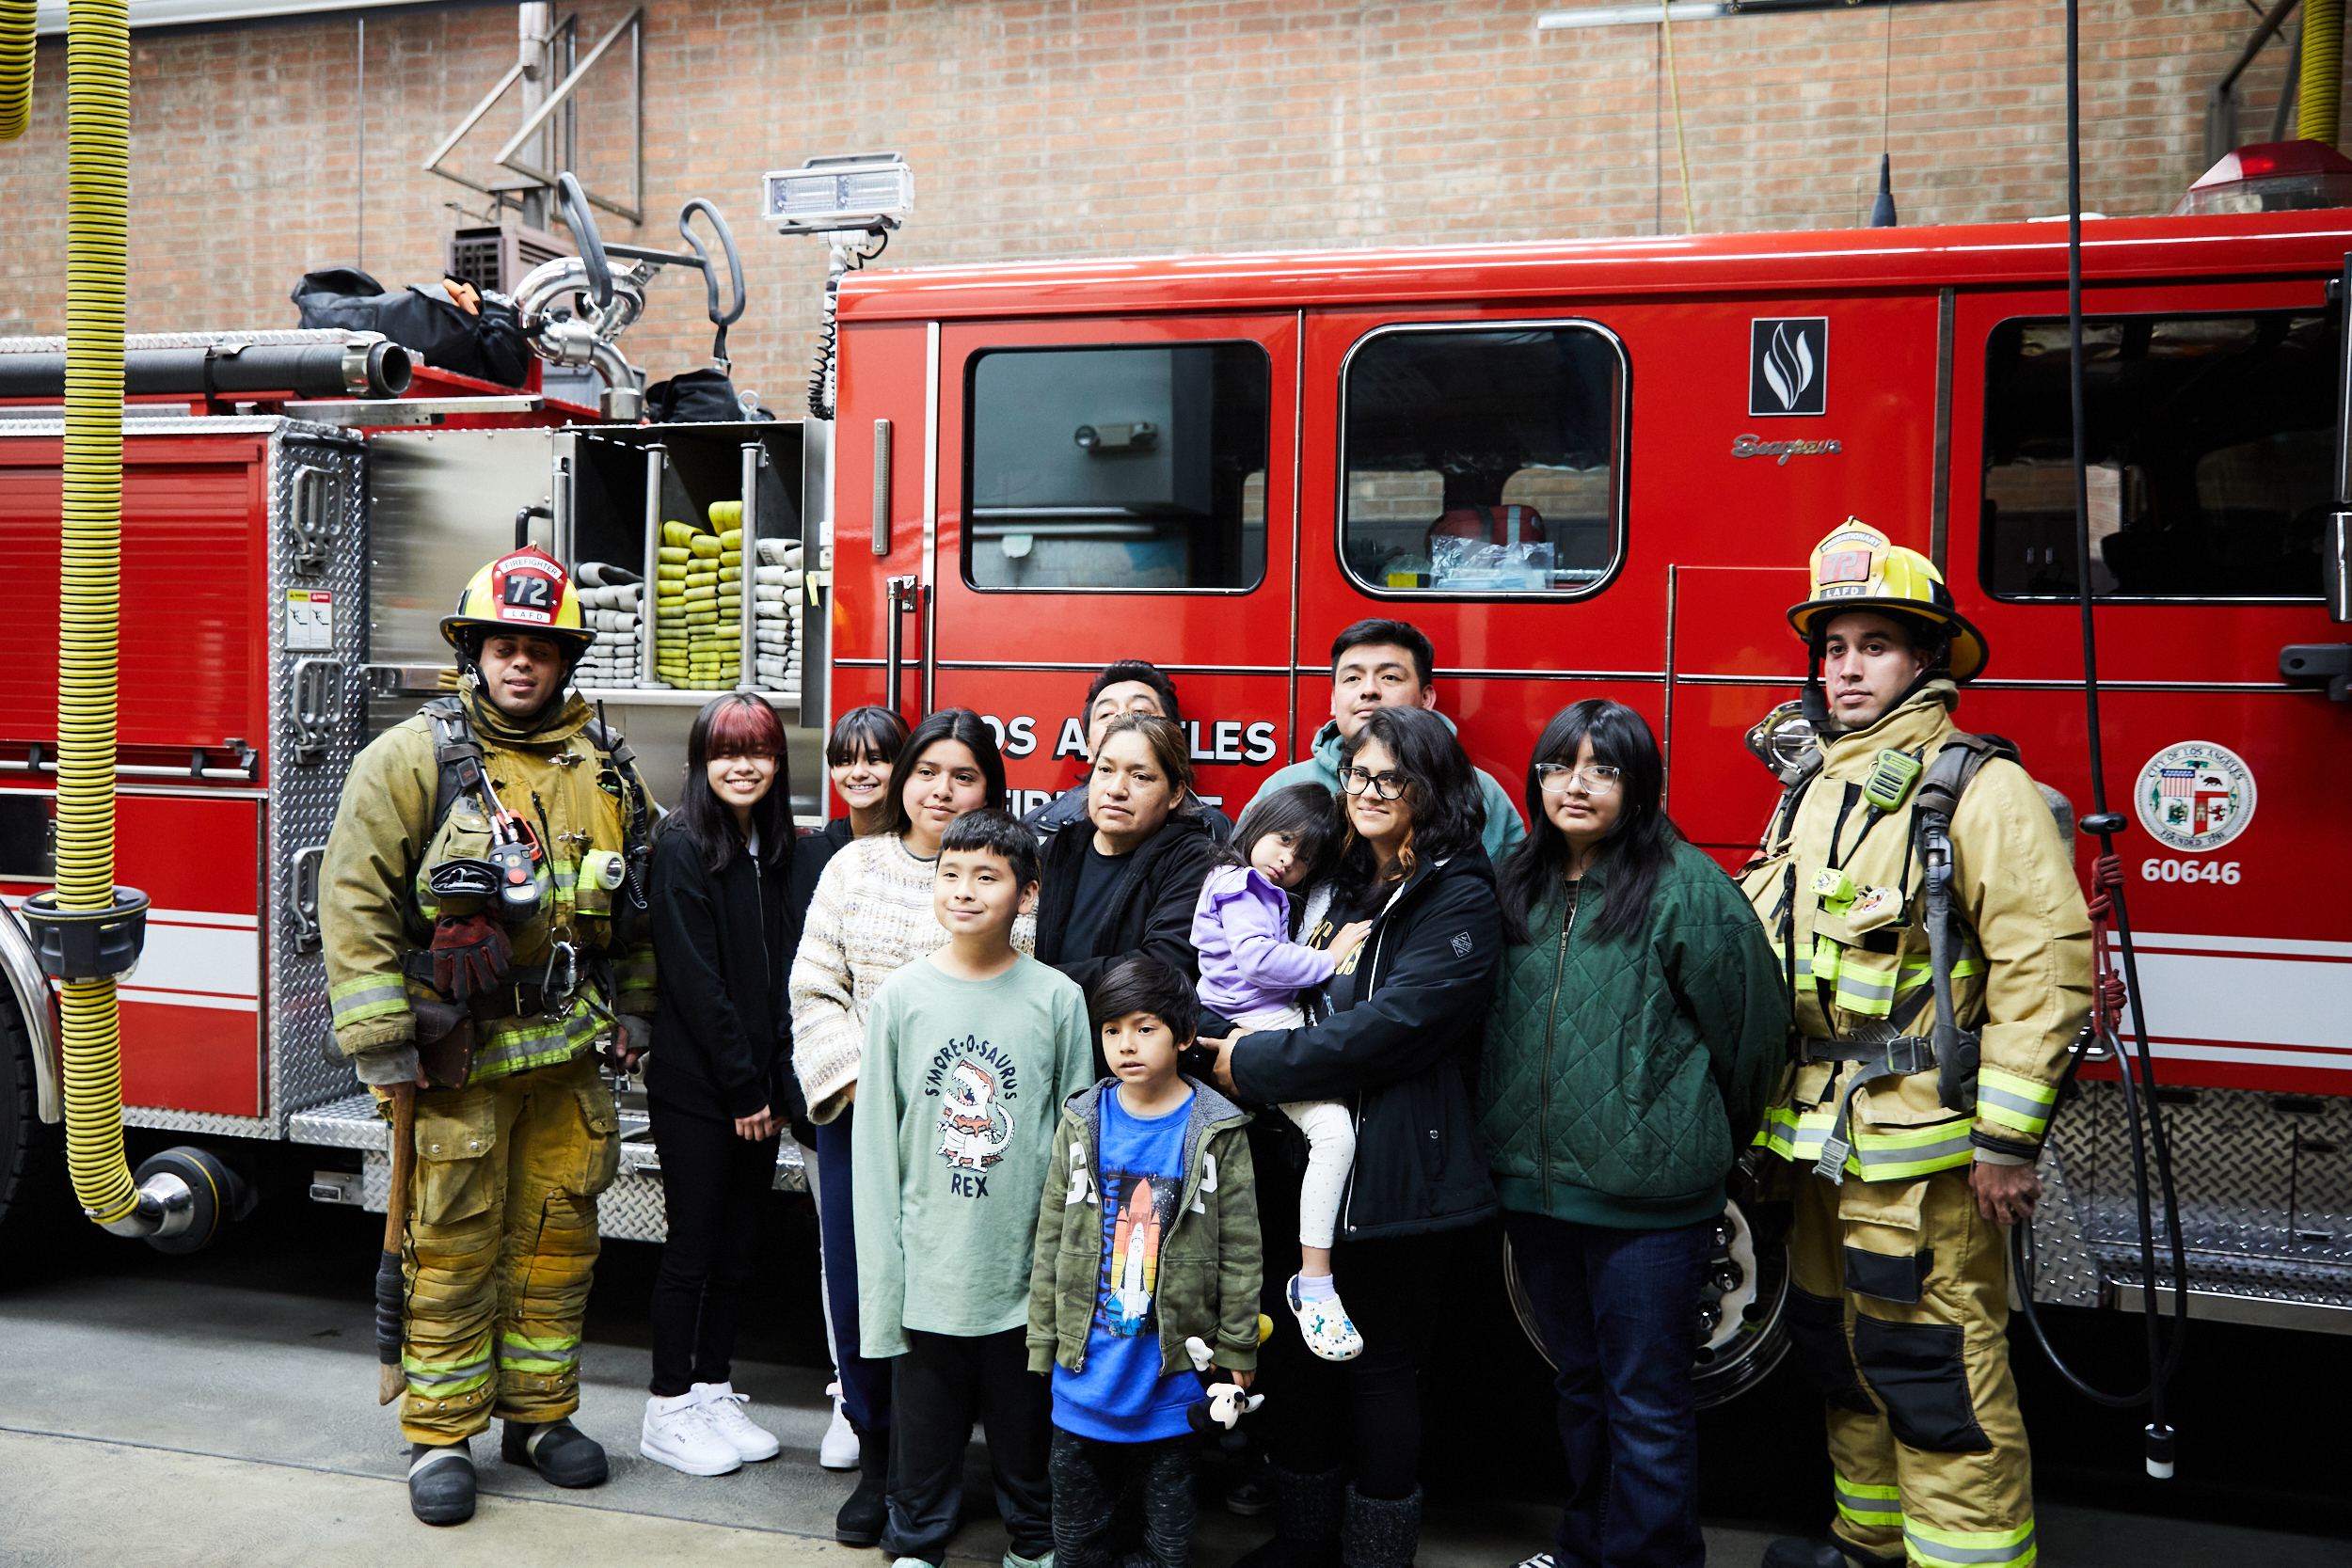 The two Mendoza families pictured with firefighters in front of fire engine